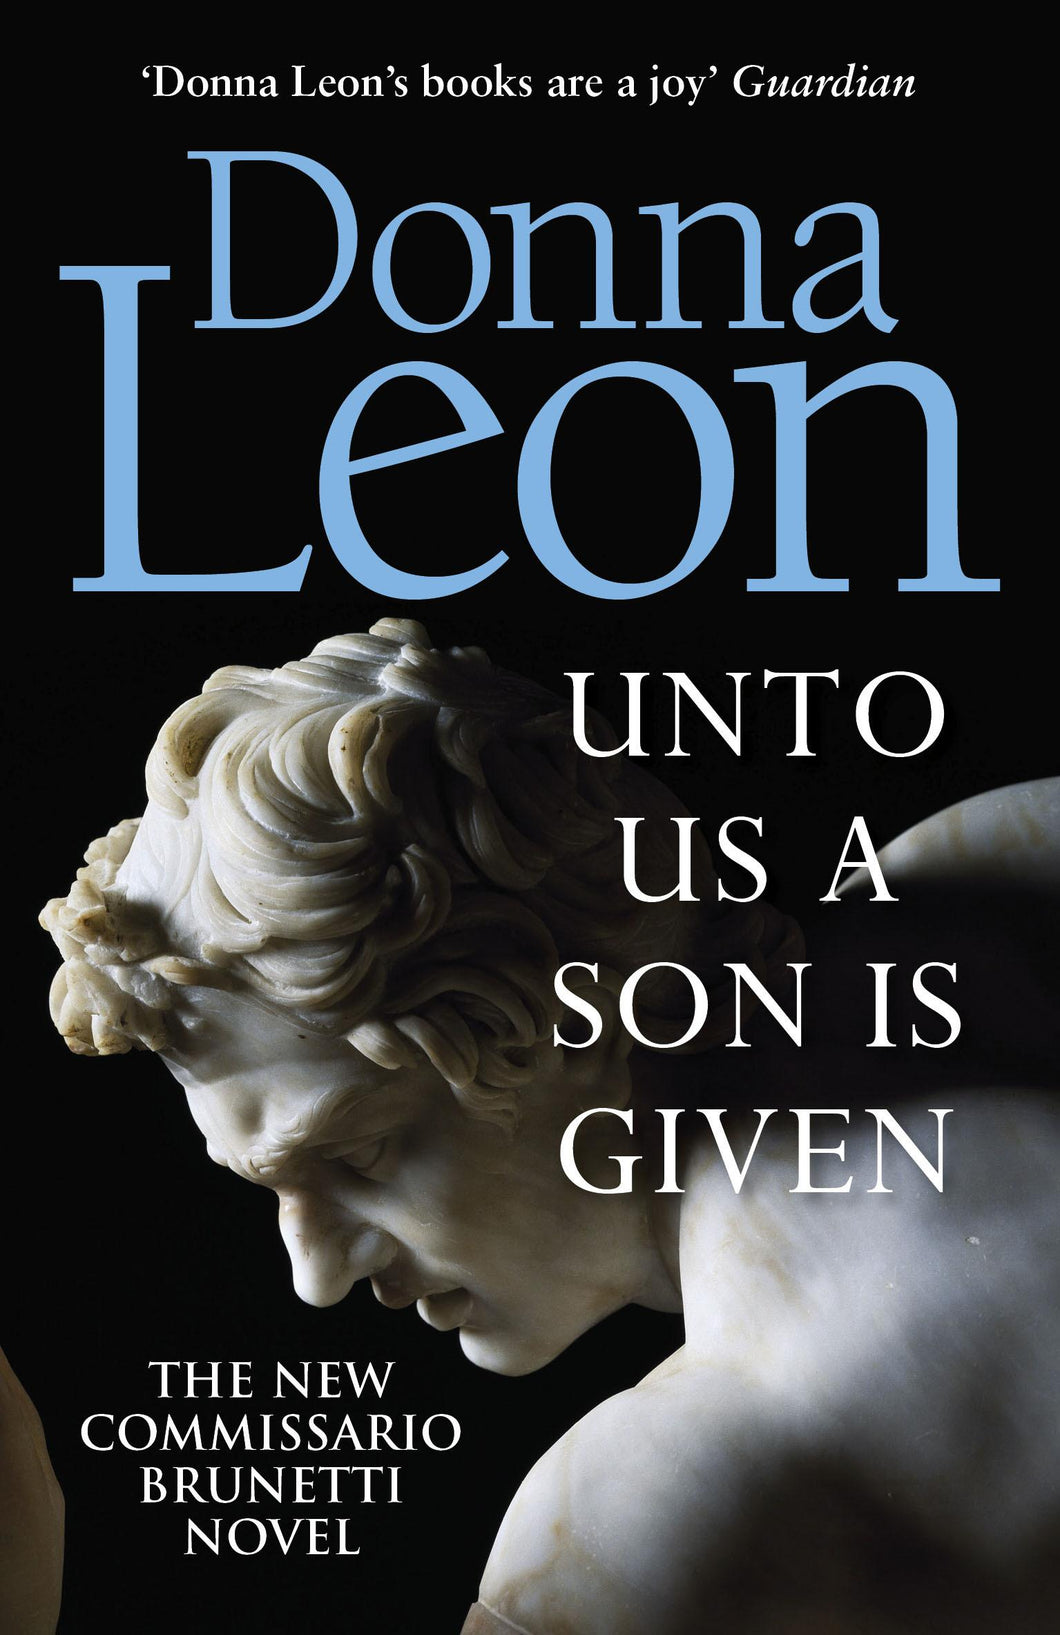 Unto Us a Son Is Given: Shortlisted for the Gold Dagger